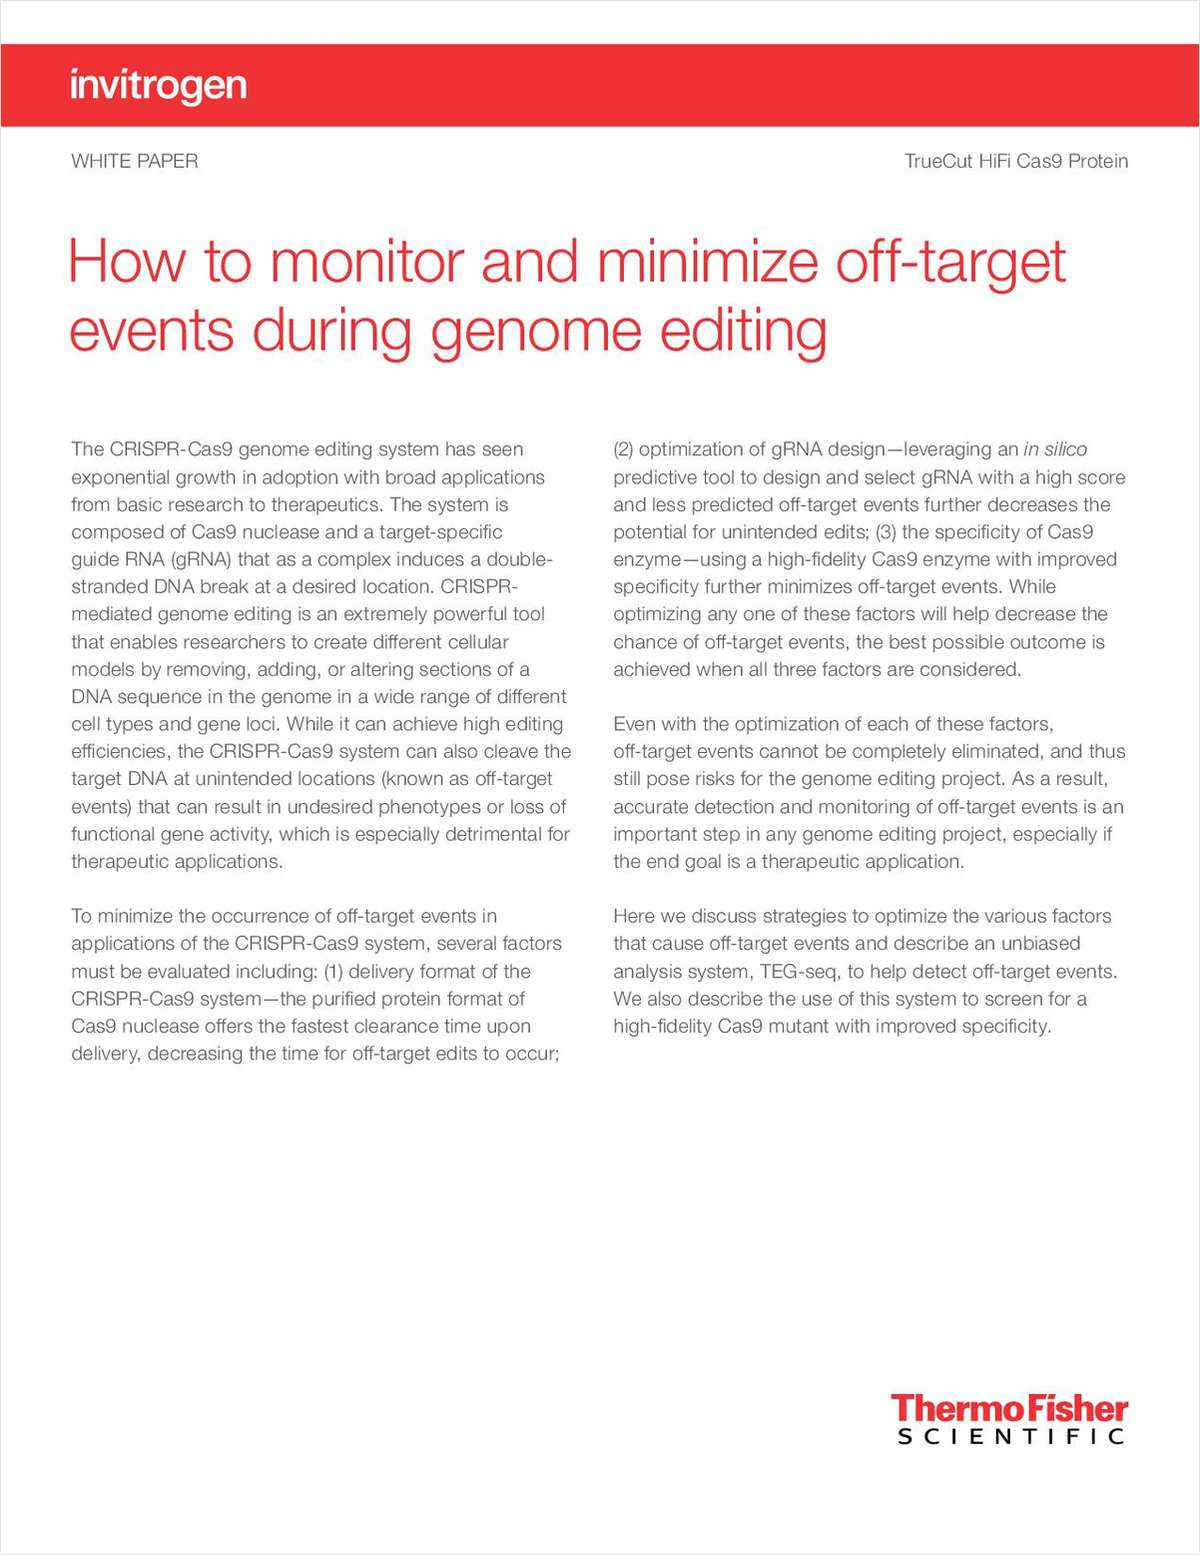 How to Monitor and Minimize Off-Target Events During Genome Editing